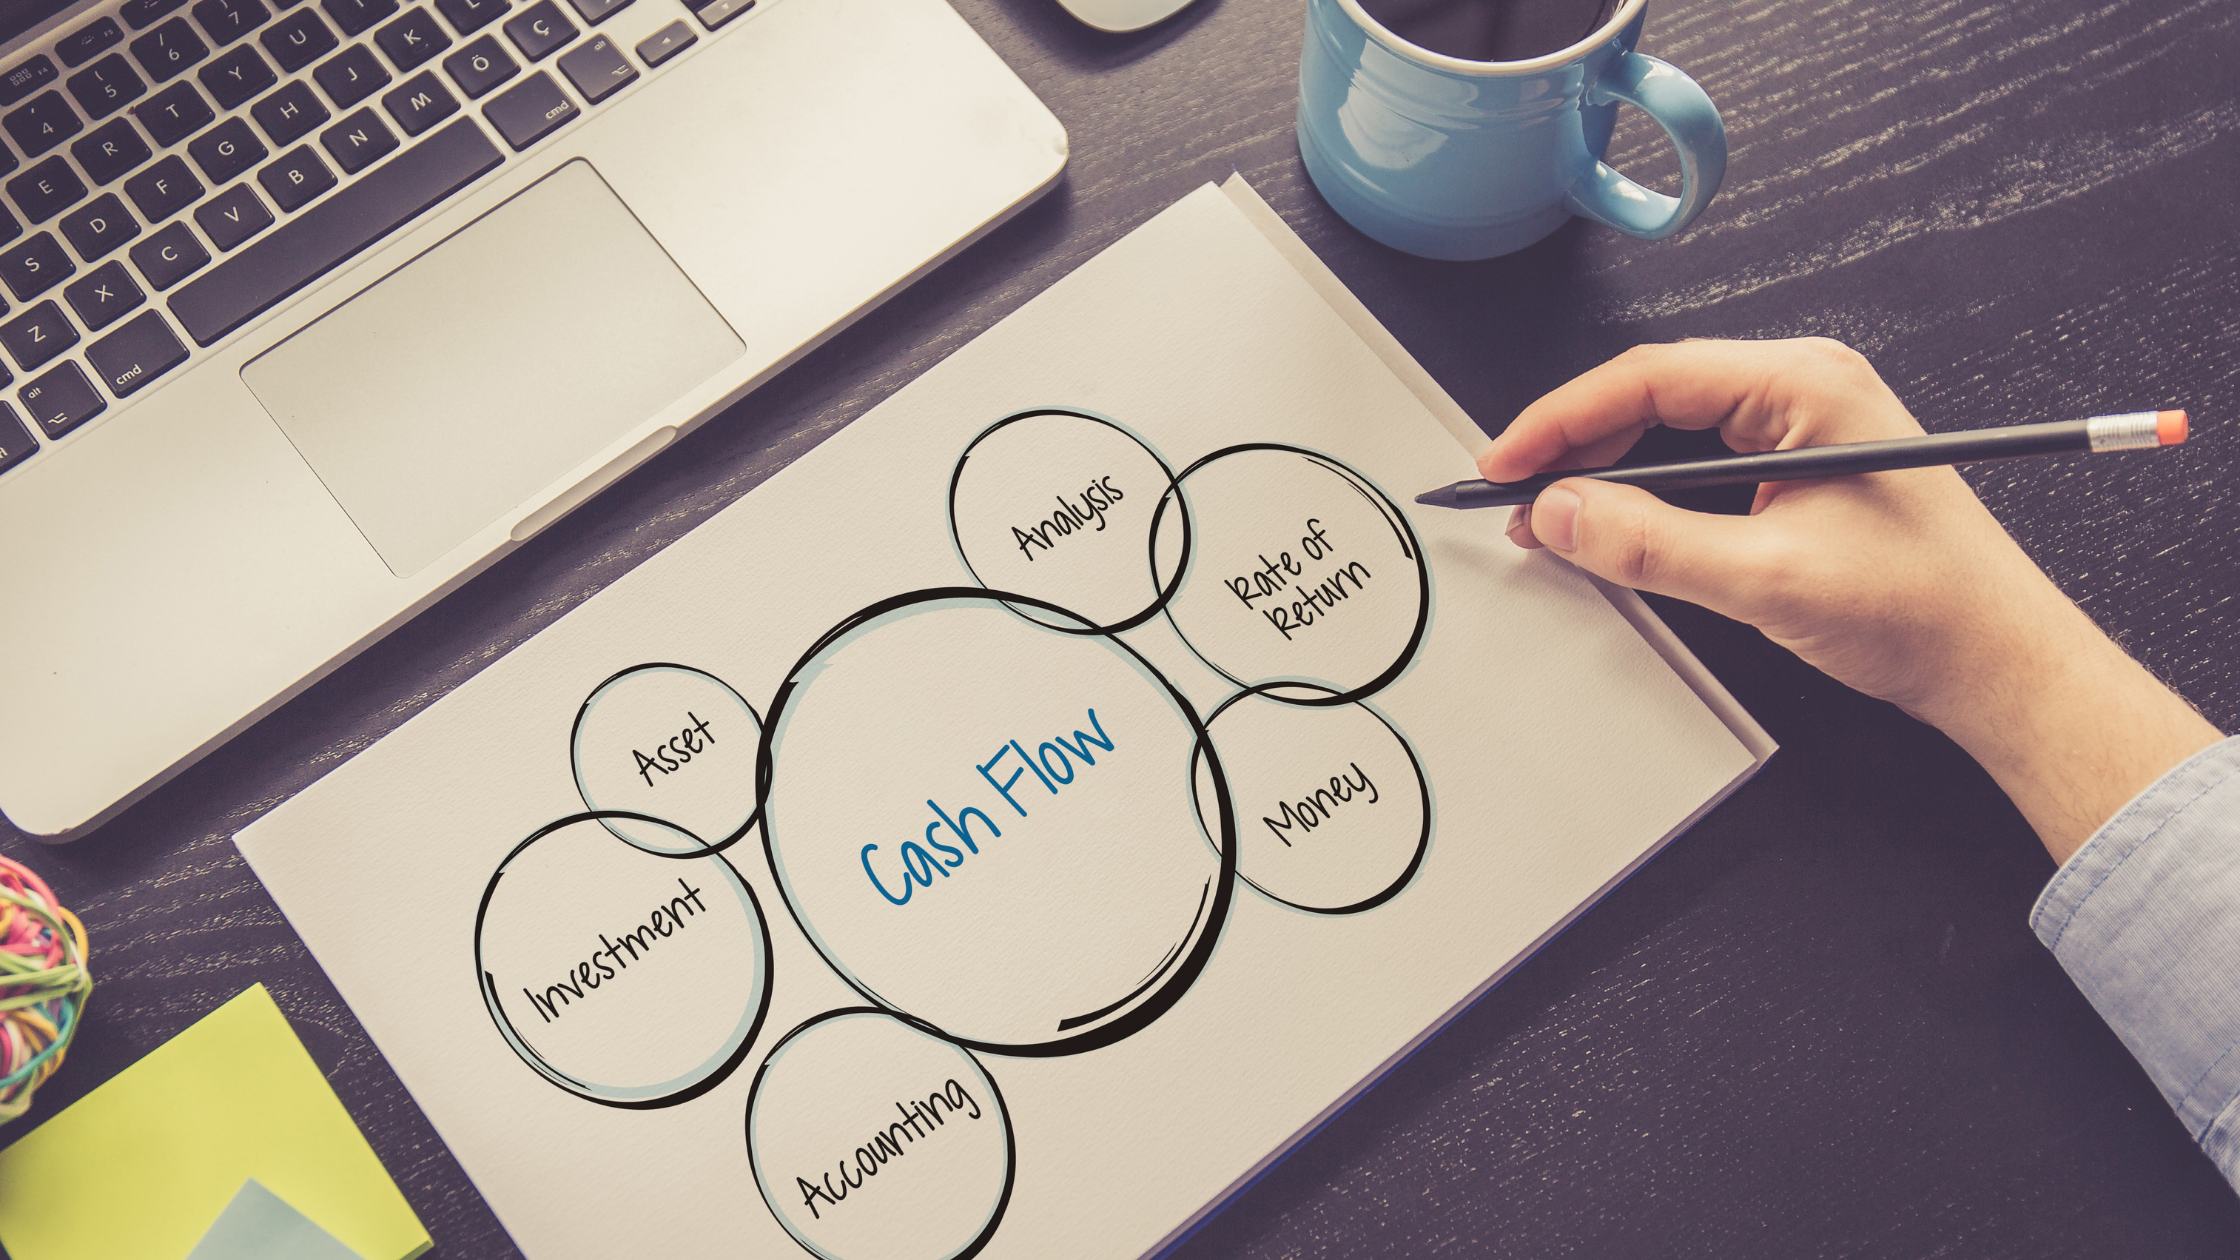 18 ways to improve cash flow in your business